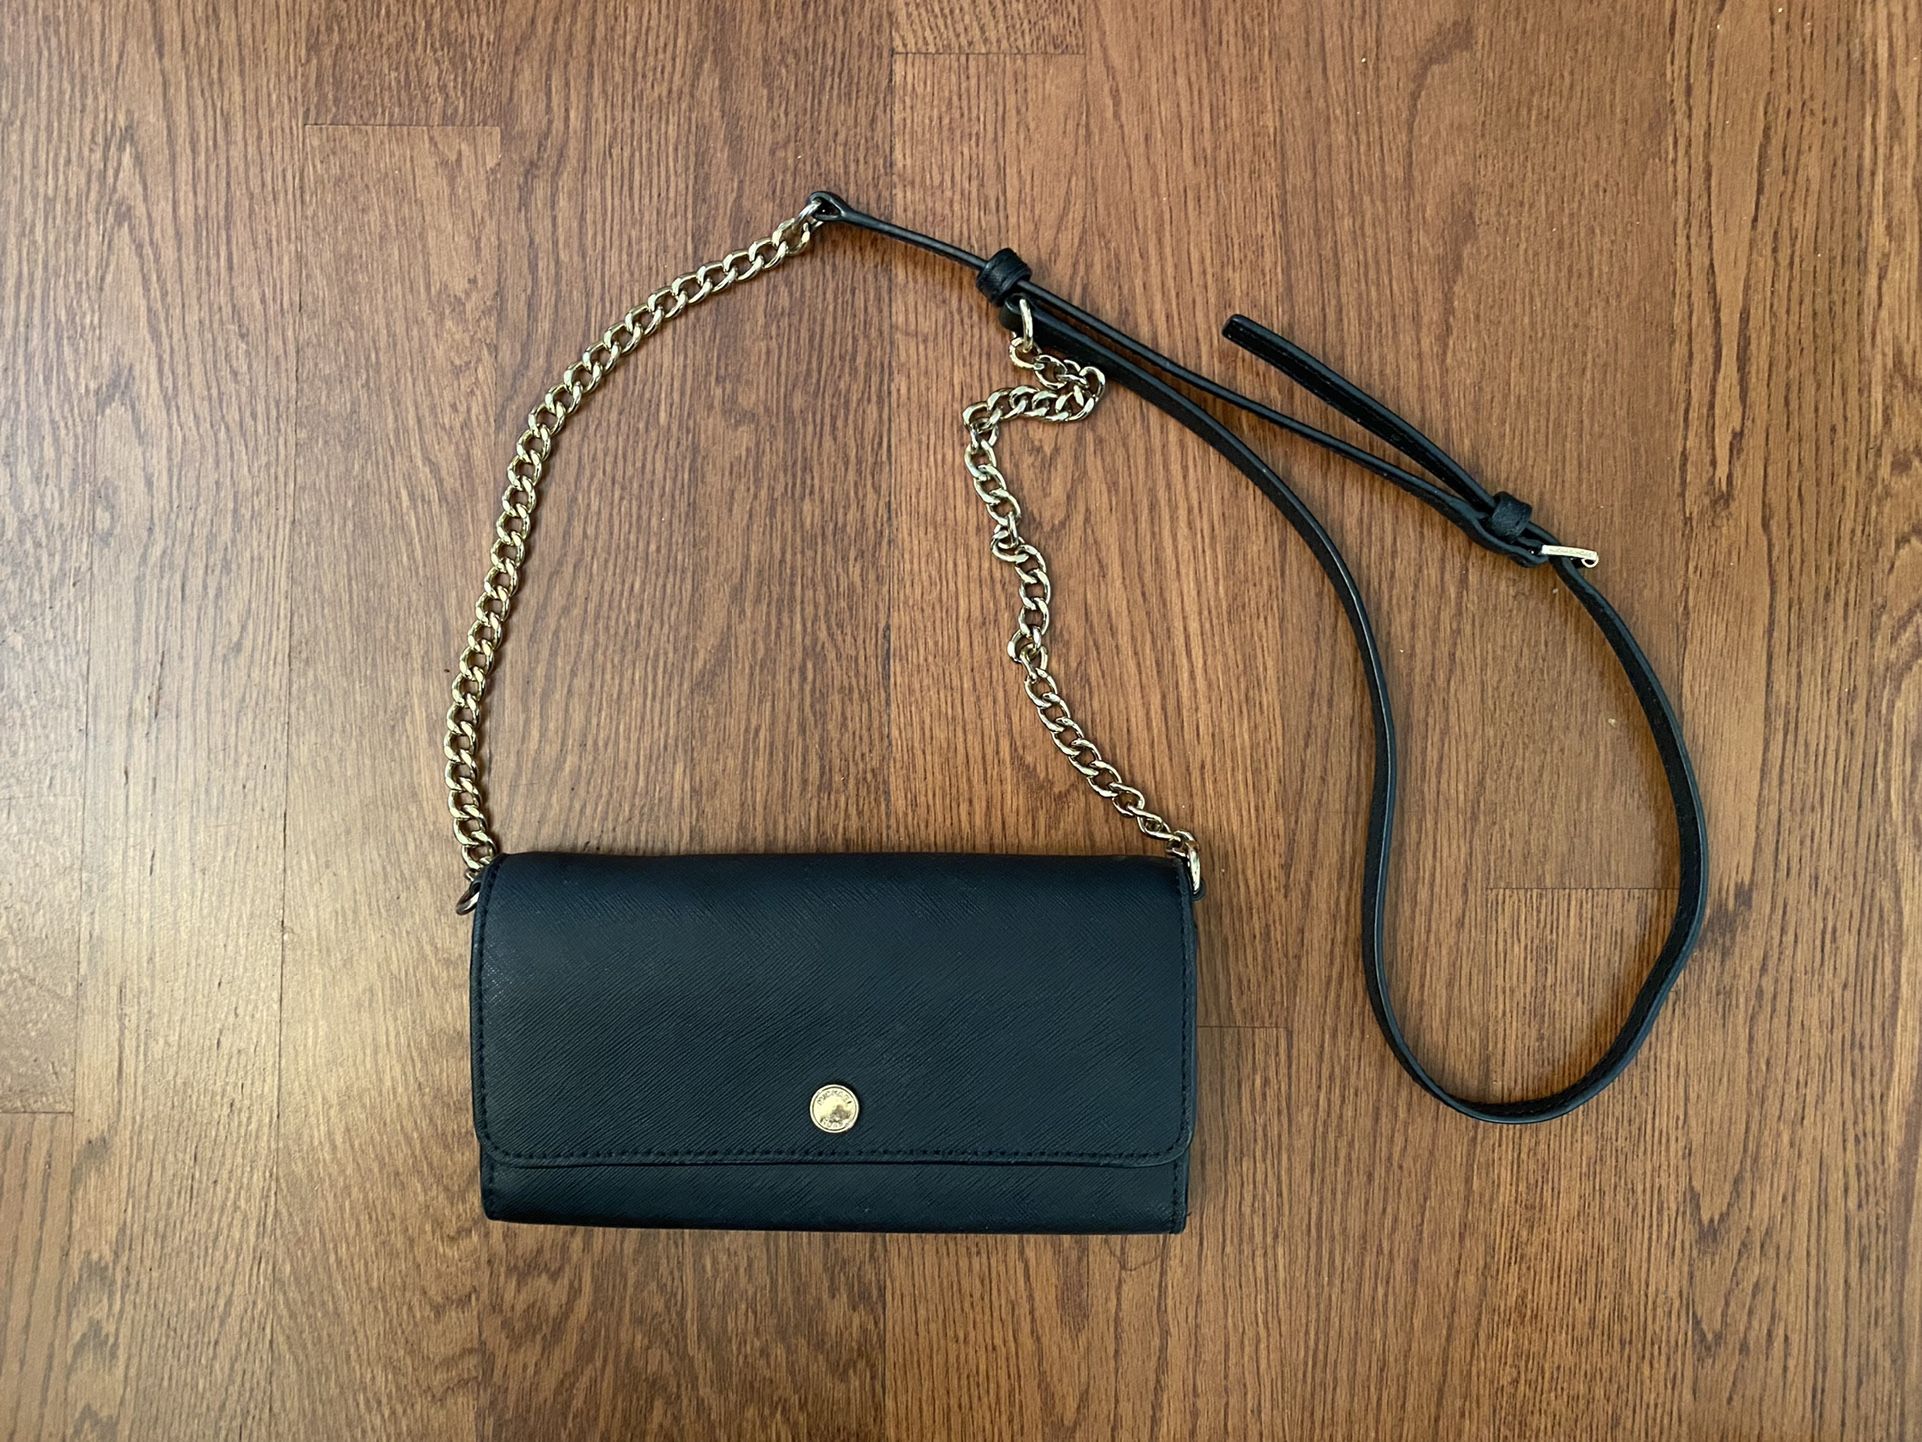 Michael Kors Black Cross Body Purse Black with Gold Accents